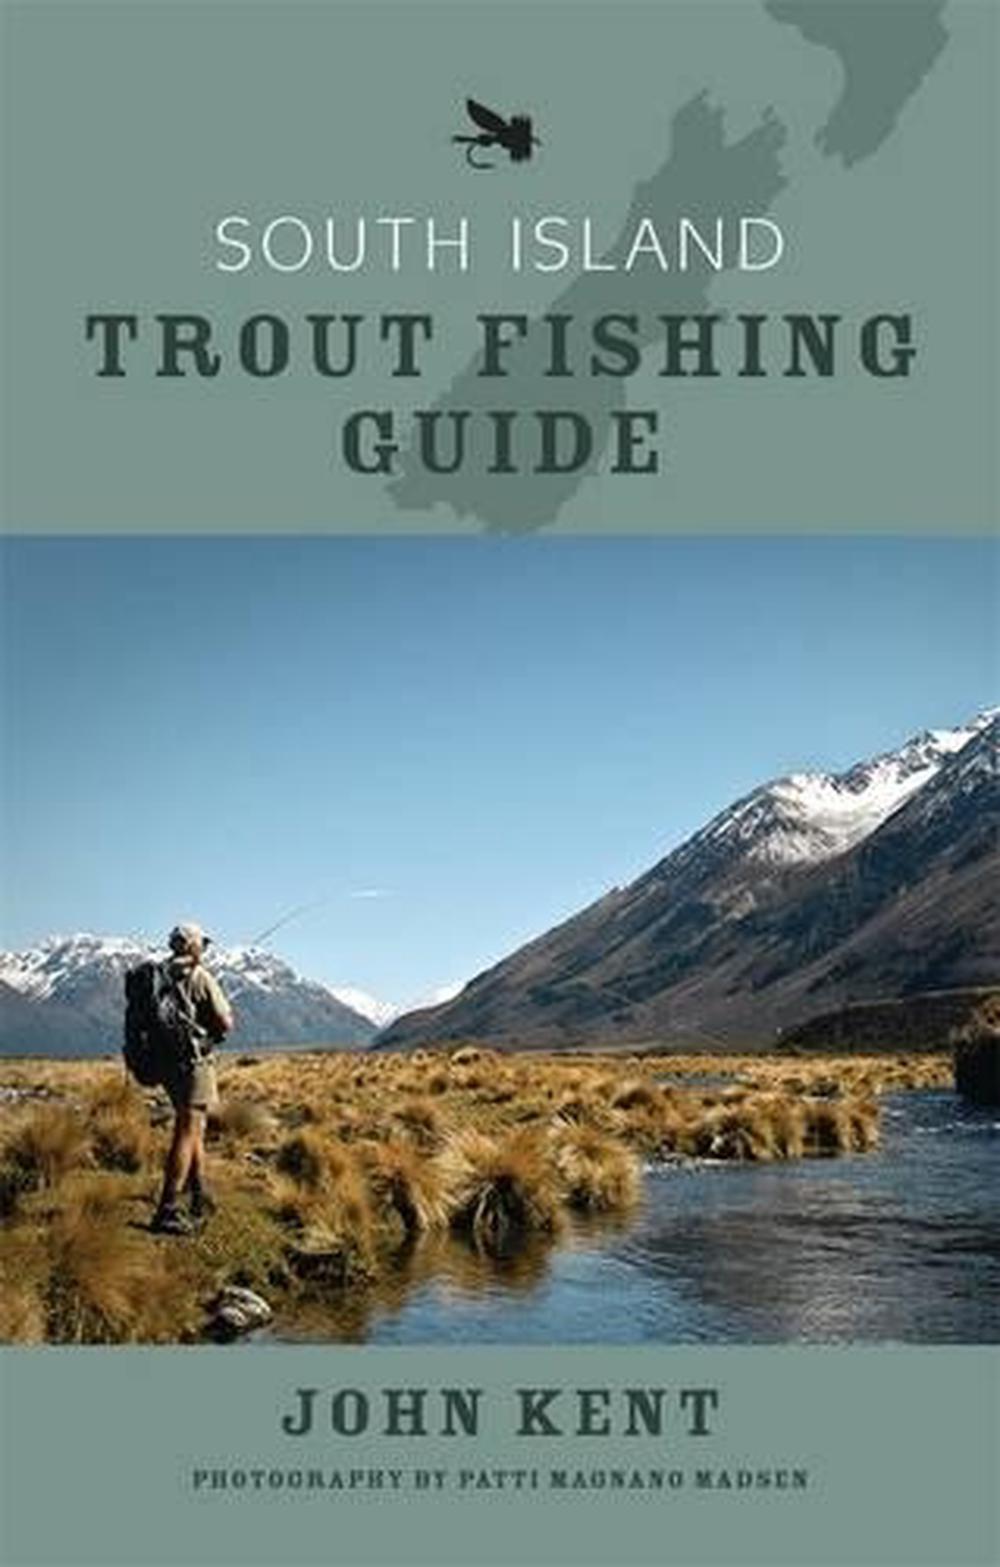 South Island Trout Fishing Guide [Book]